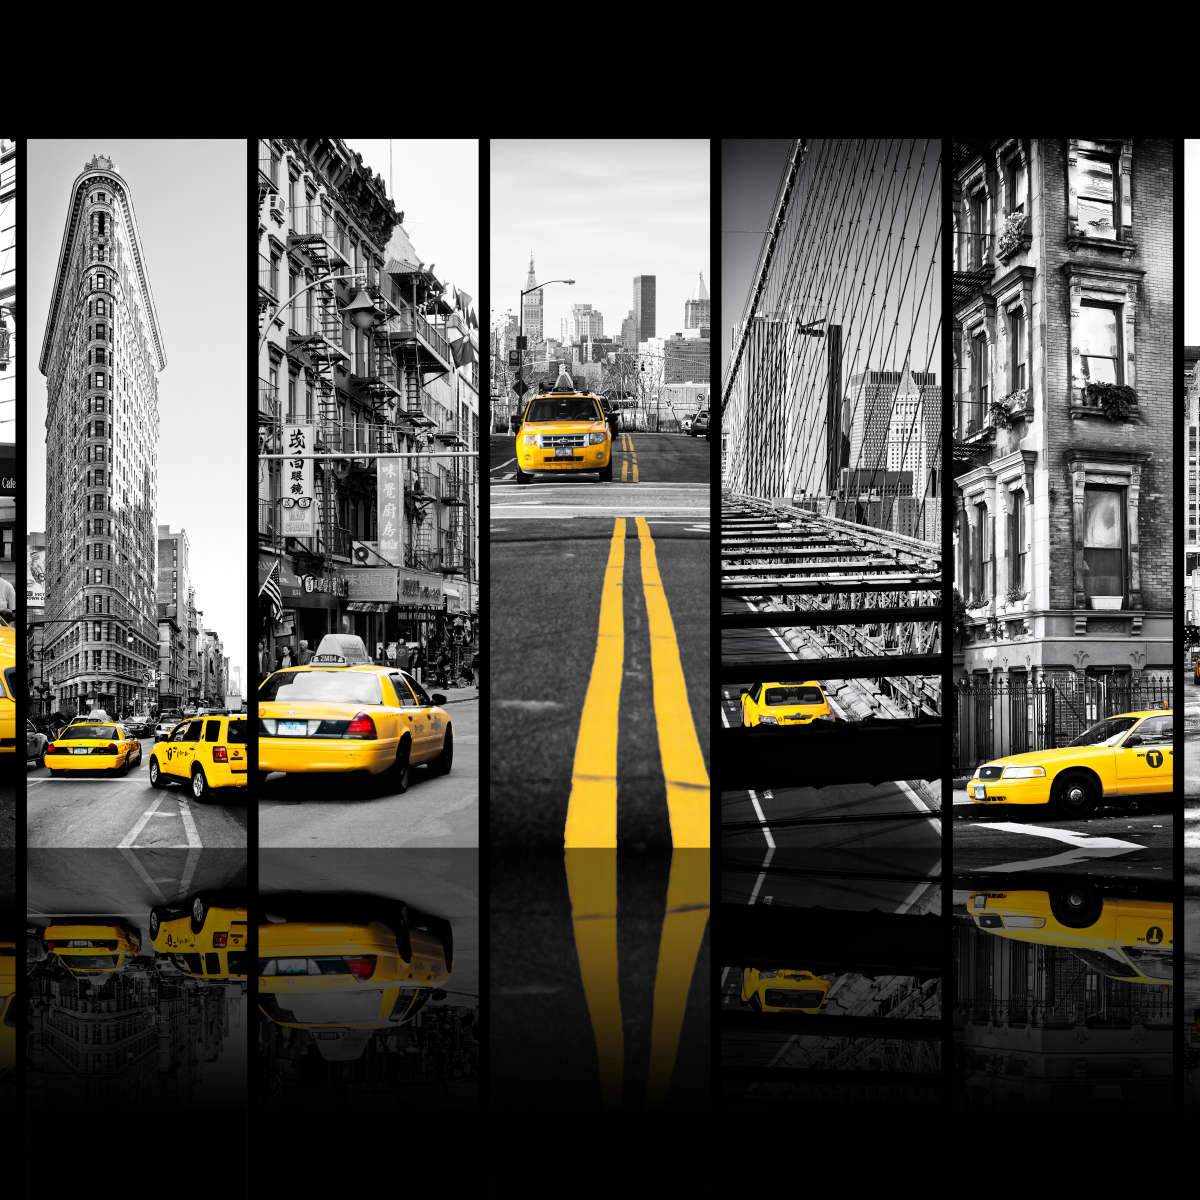 & | Taxi Cabs Drawings Art Prints Photograph Wall Art Paintings,